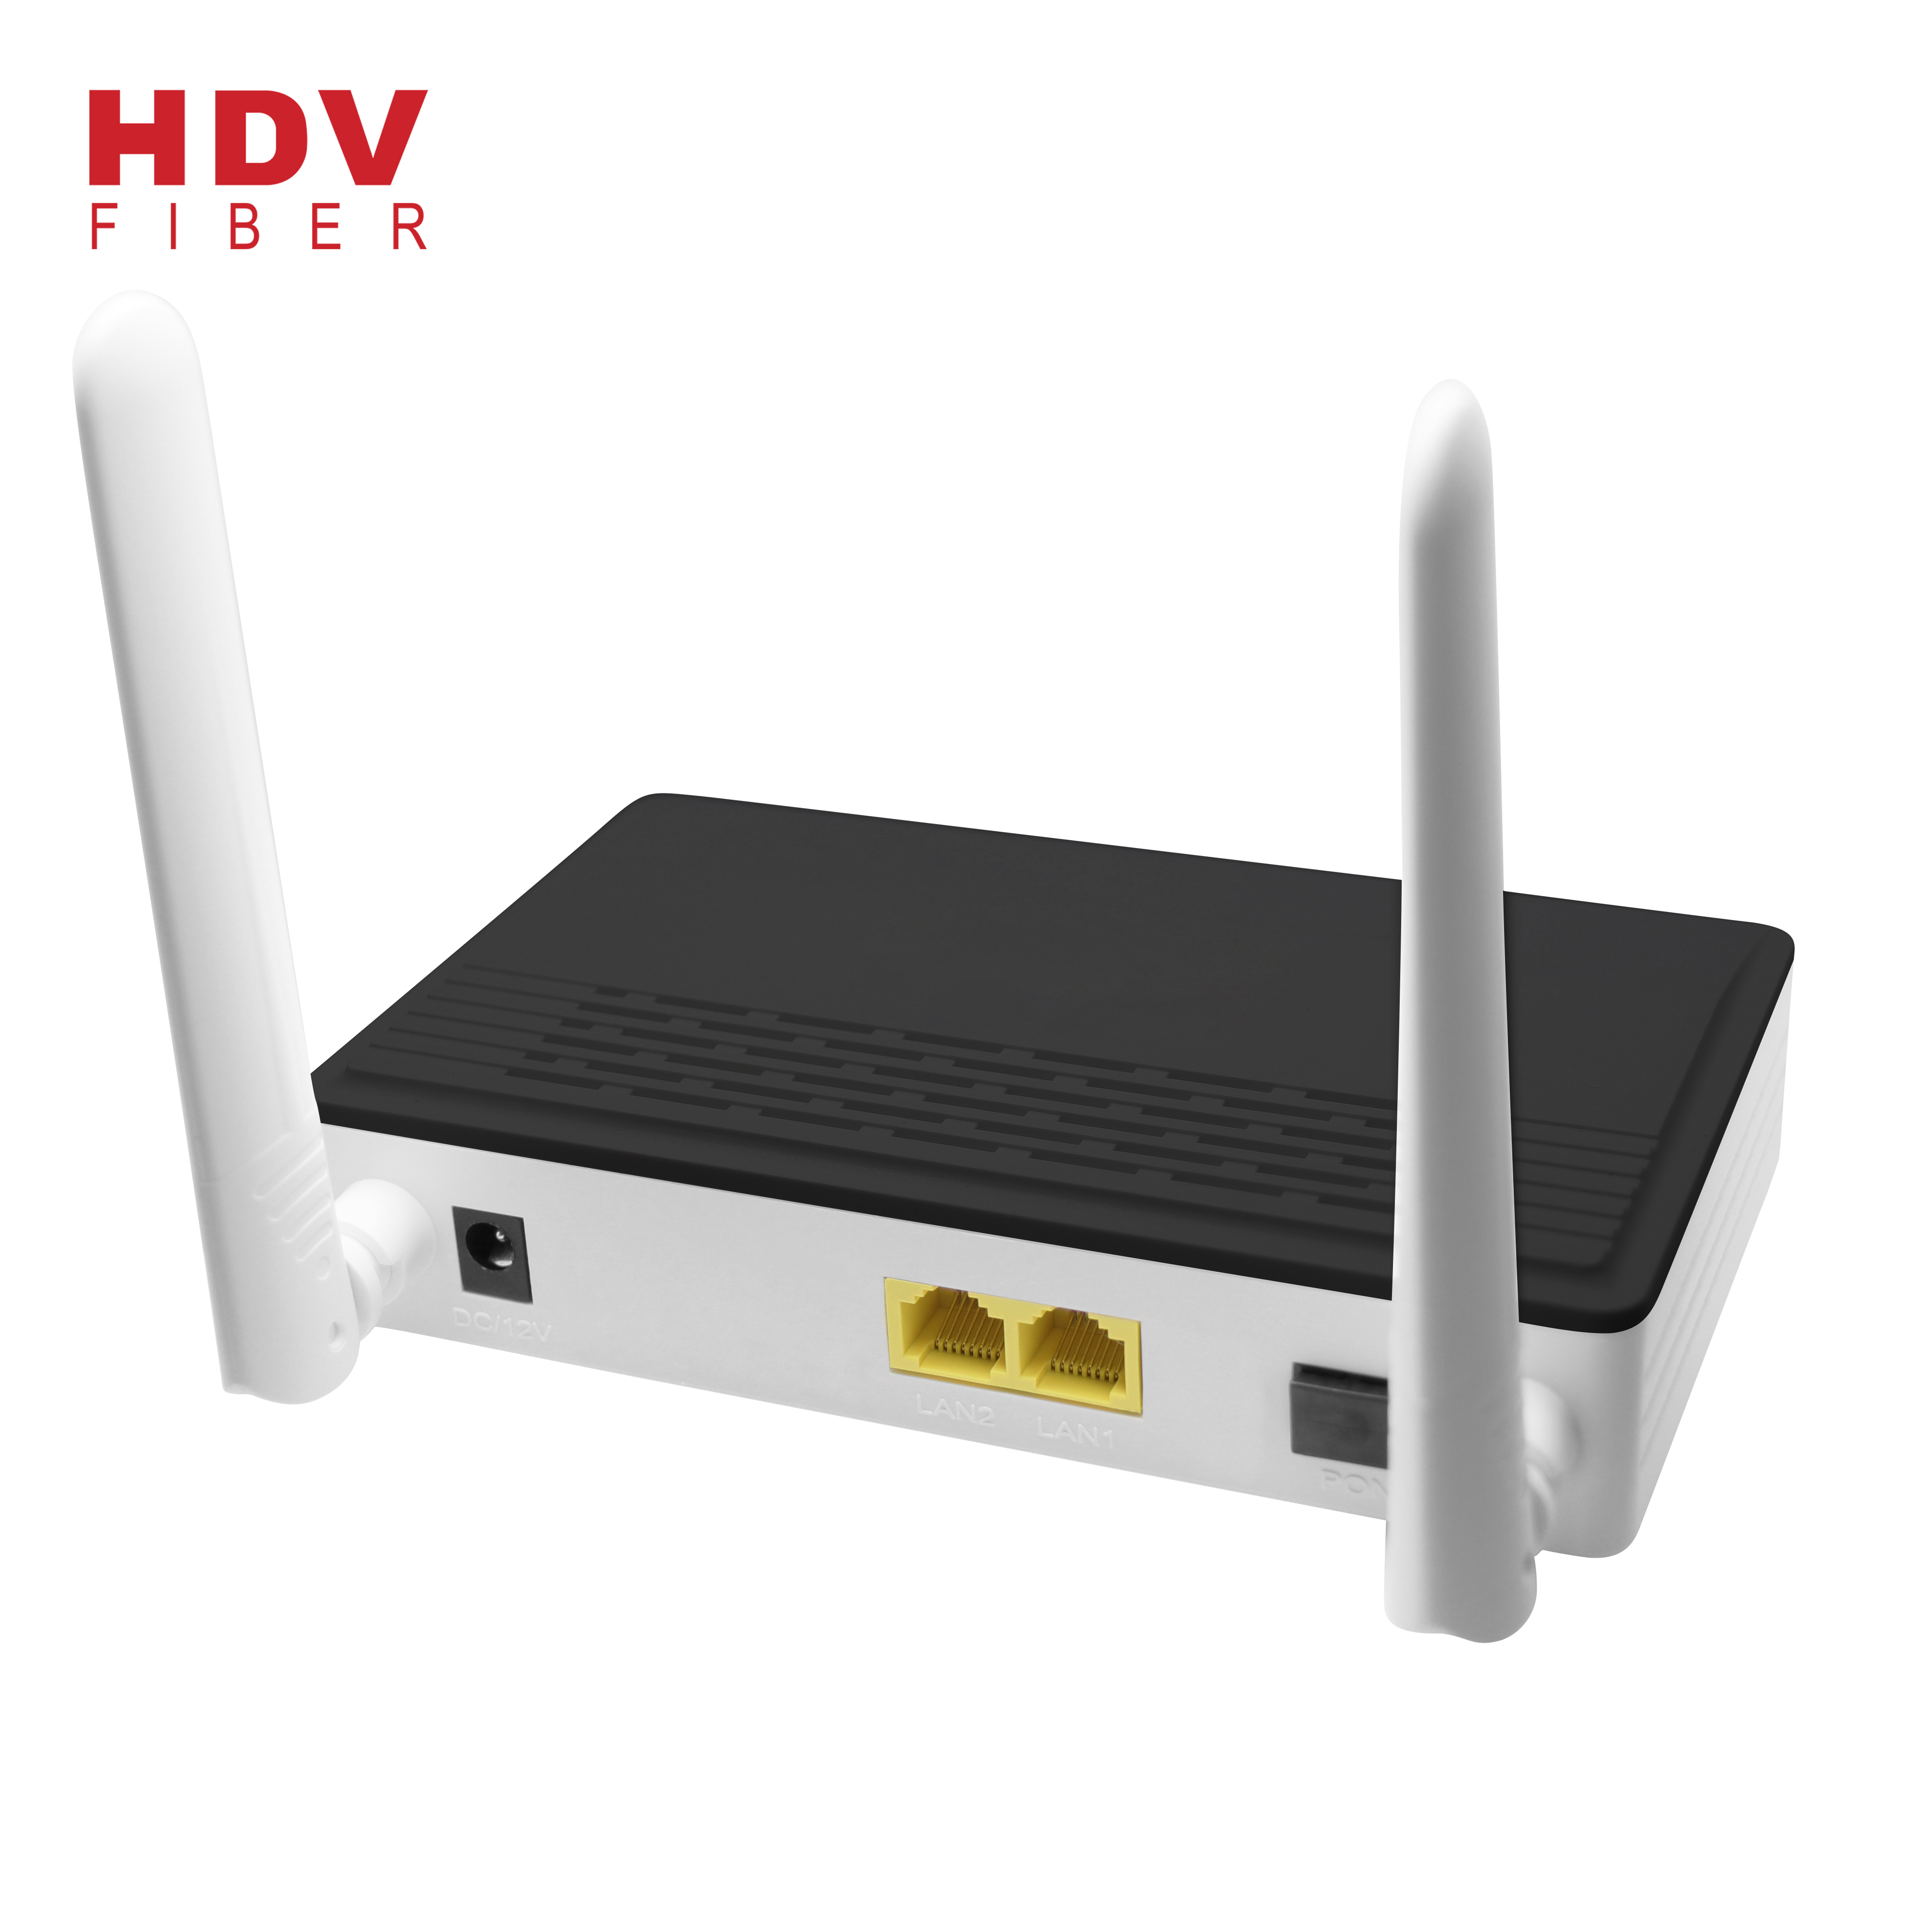 8 Year Exporter Gepon Olt Price - HDV New product 1GE+1FE WIFI router gpon ftth onu for huawei – HDV